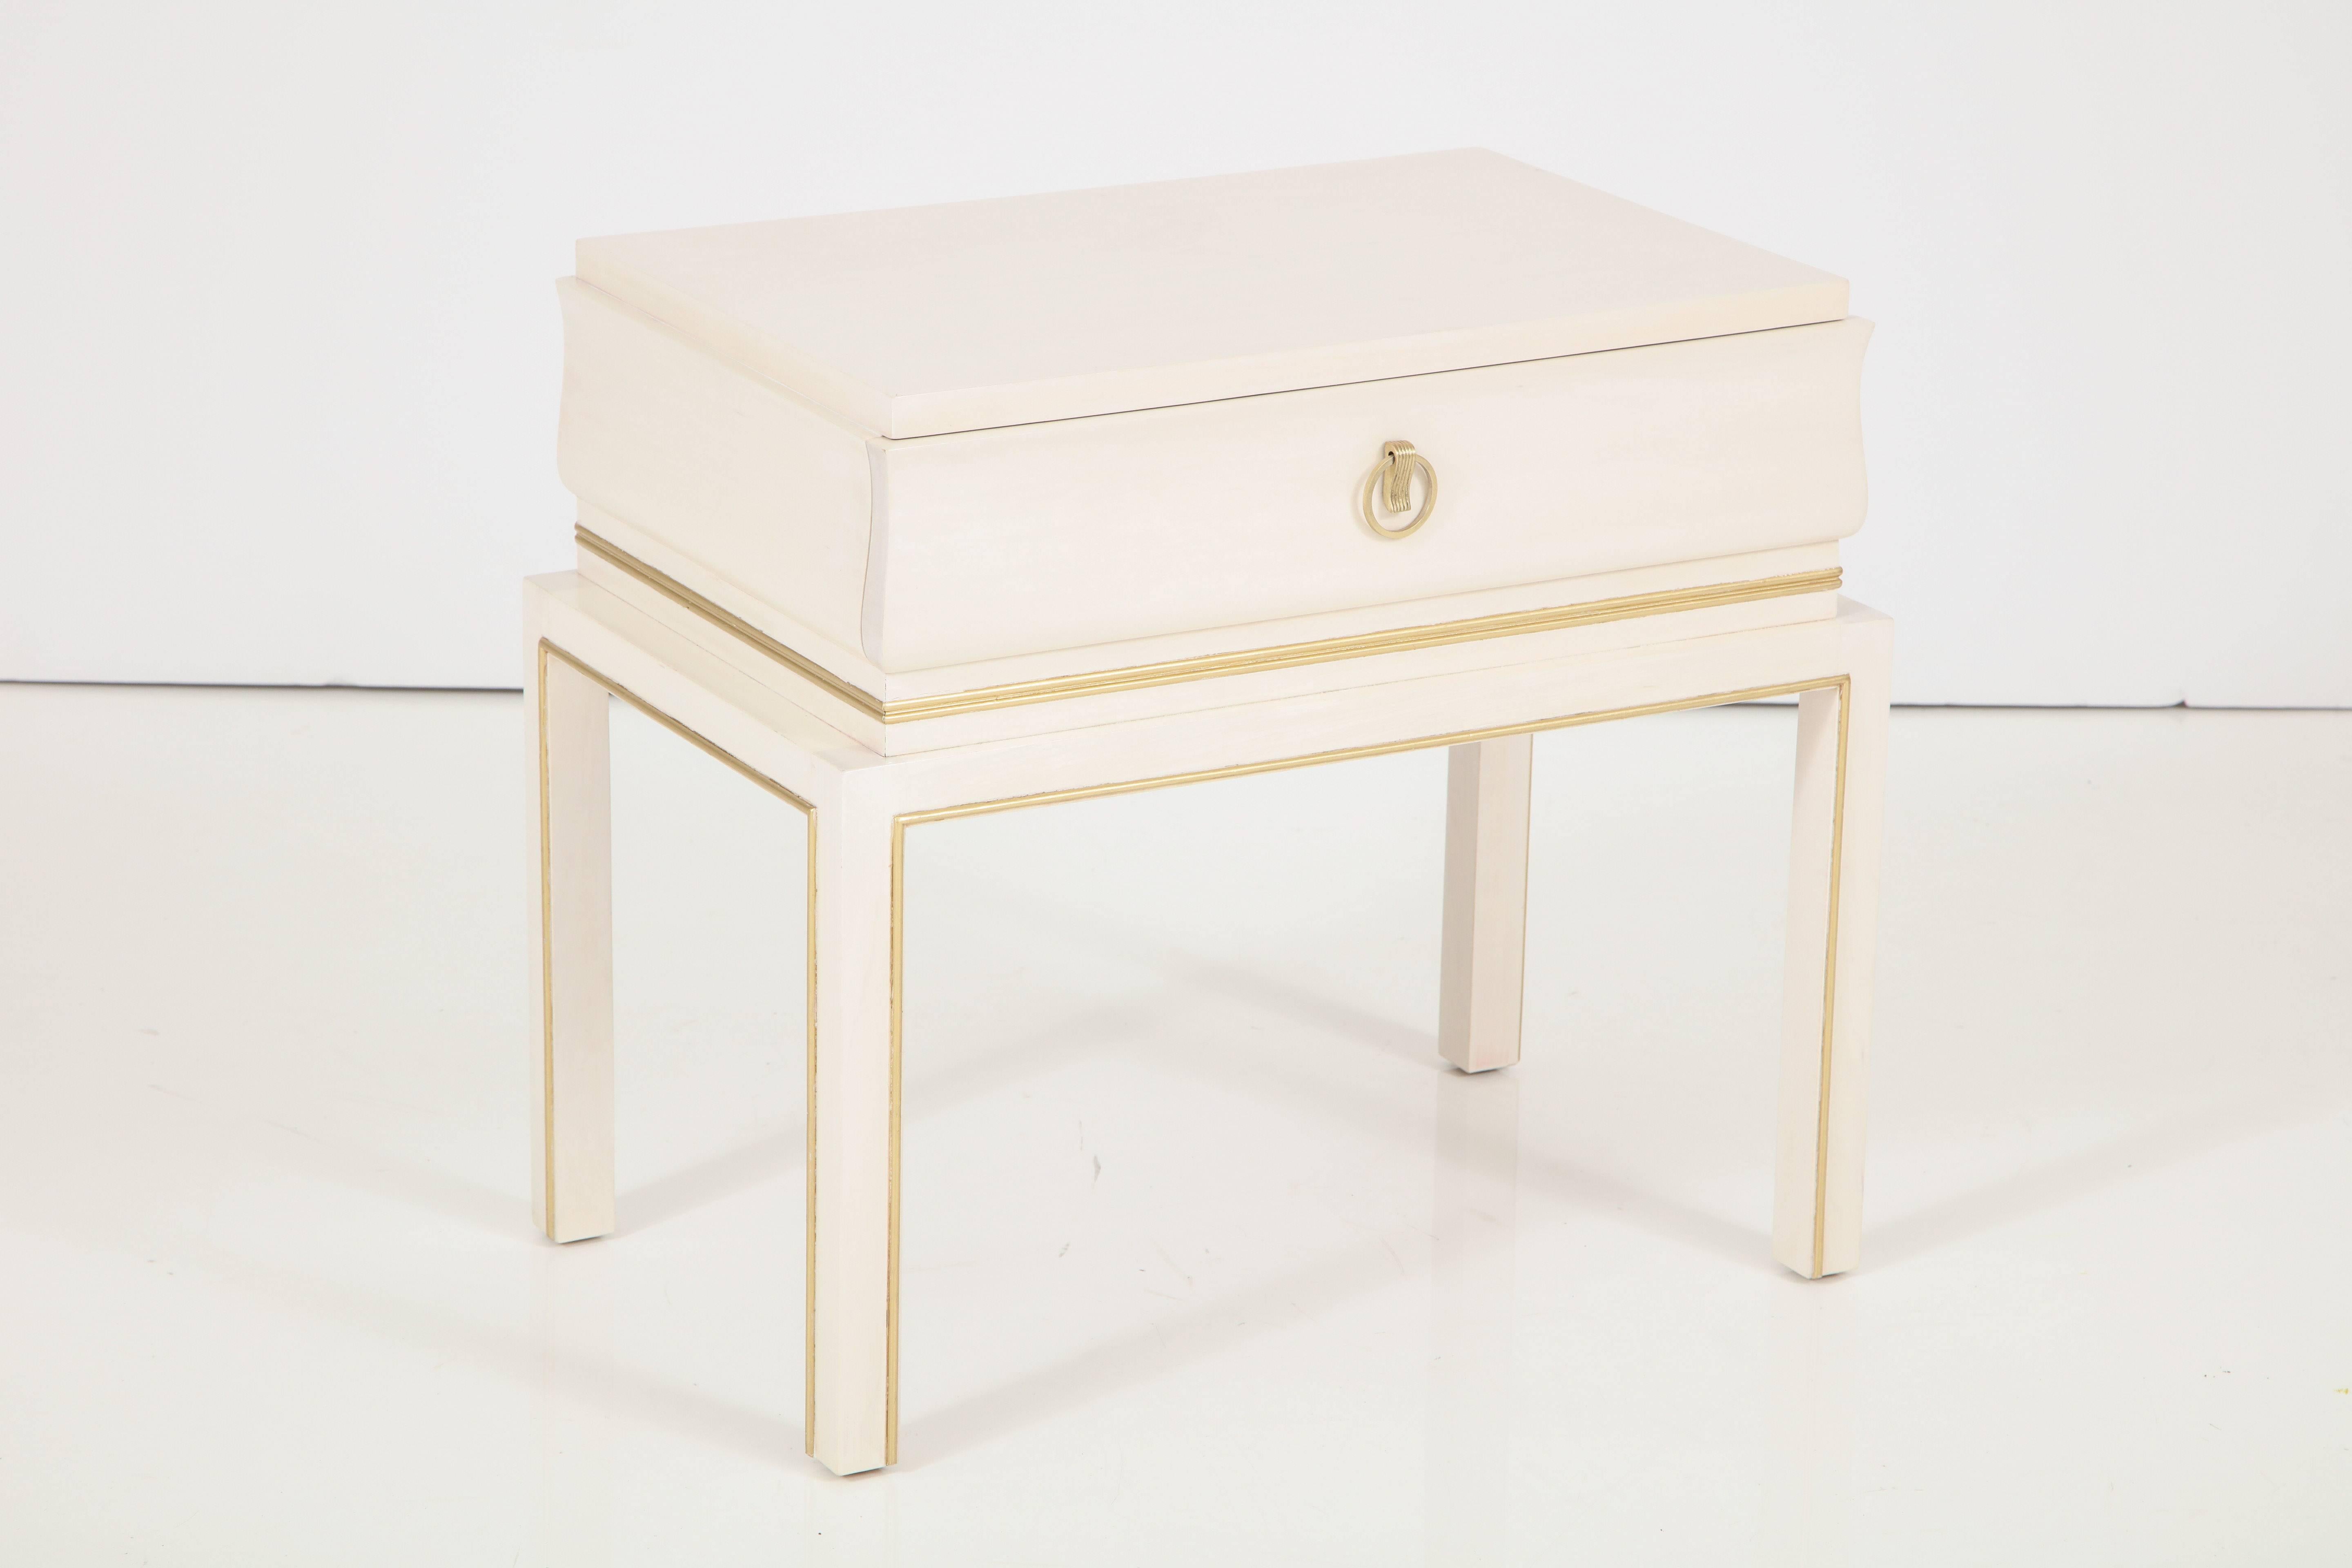 Pair of Tommi Parzinger midcentury bleached maple side tables/ nigh stands with satin brass pulls, trimmed in 22-karat gold leaf detailing around legs and perimeter of cabinet. Stamped.